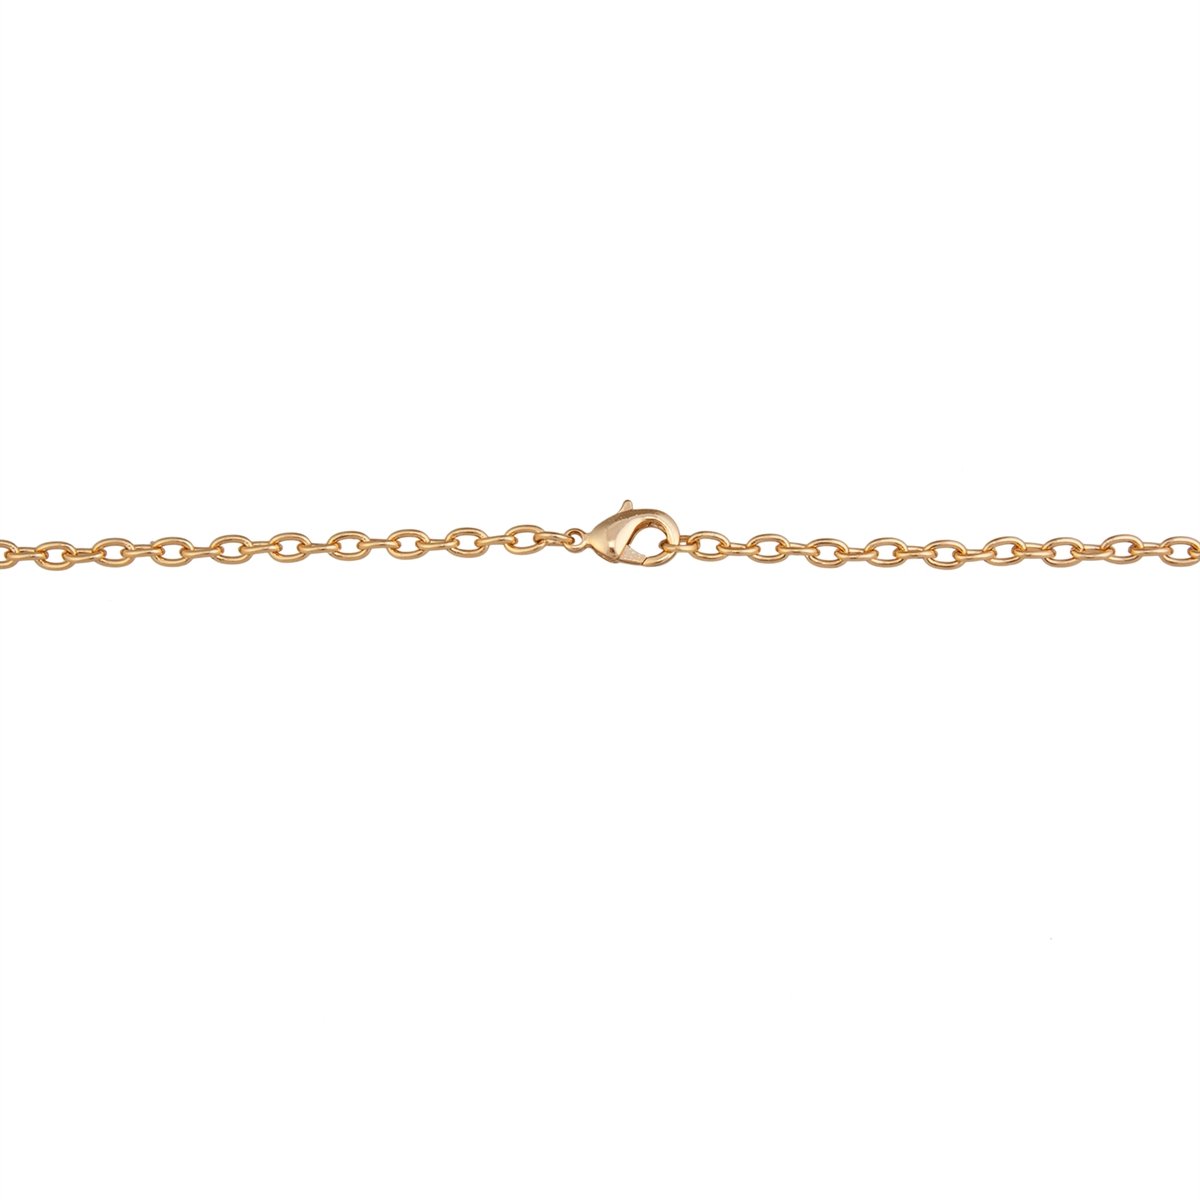 Charles Albert Jewelry - Gold Tone 3mm Base Metal Cross Chain - Clasp Close Up